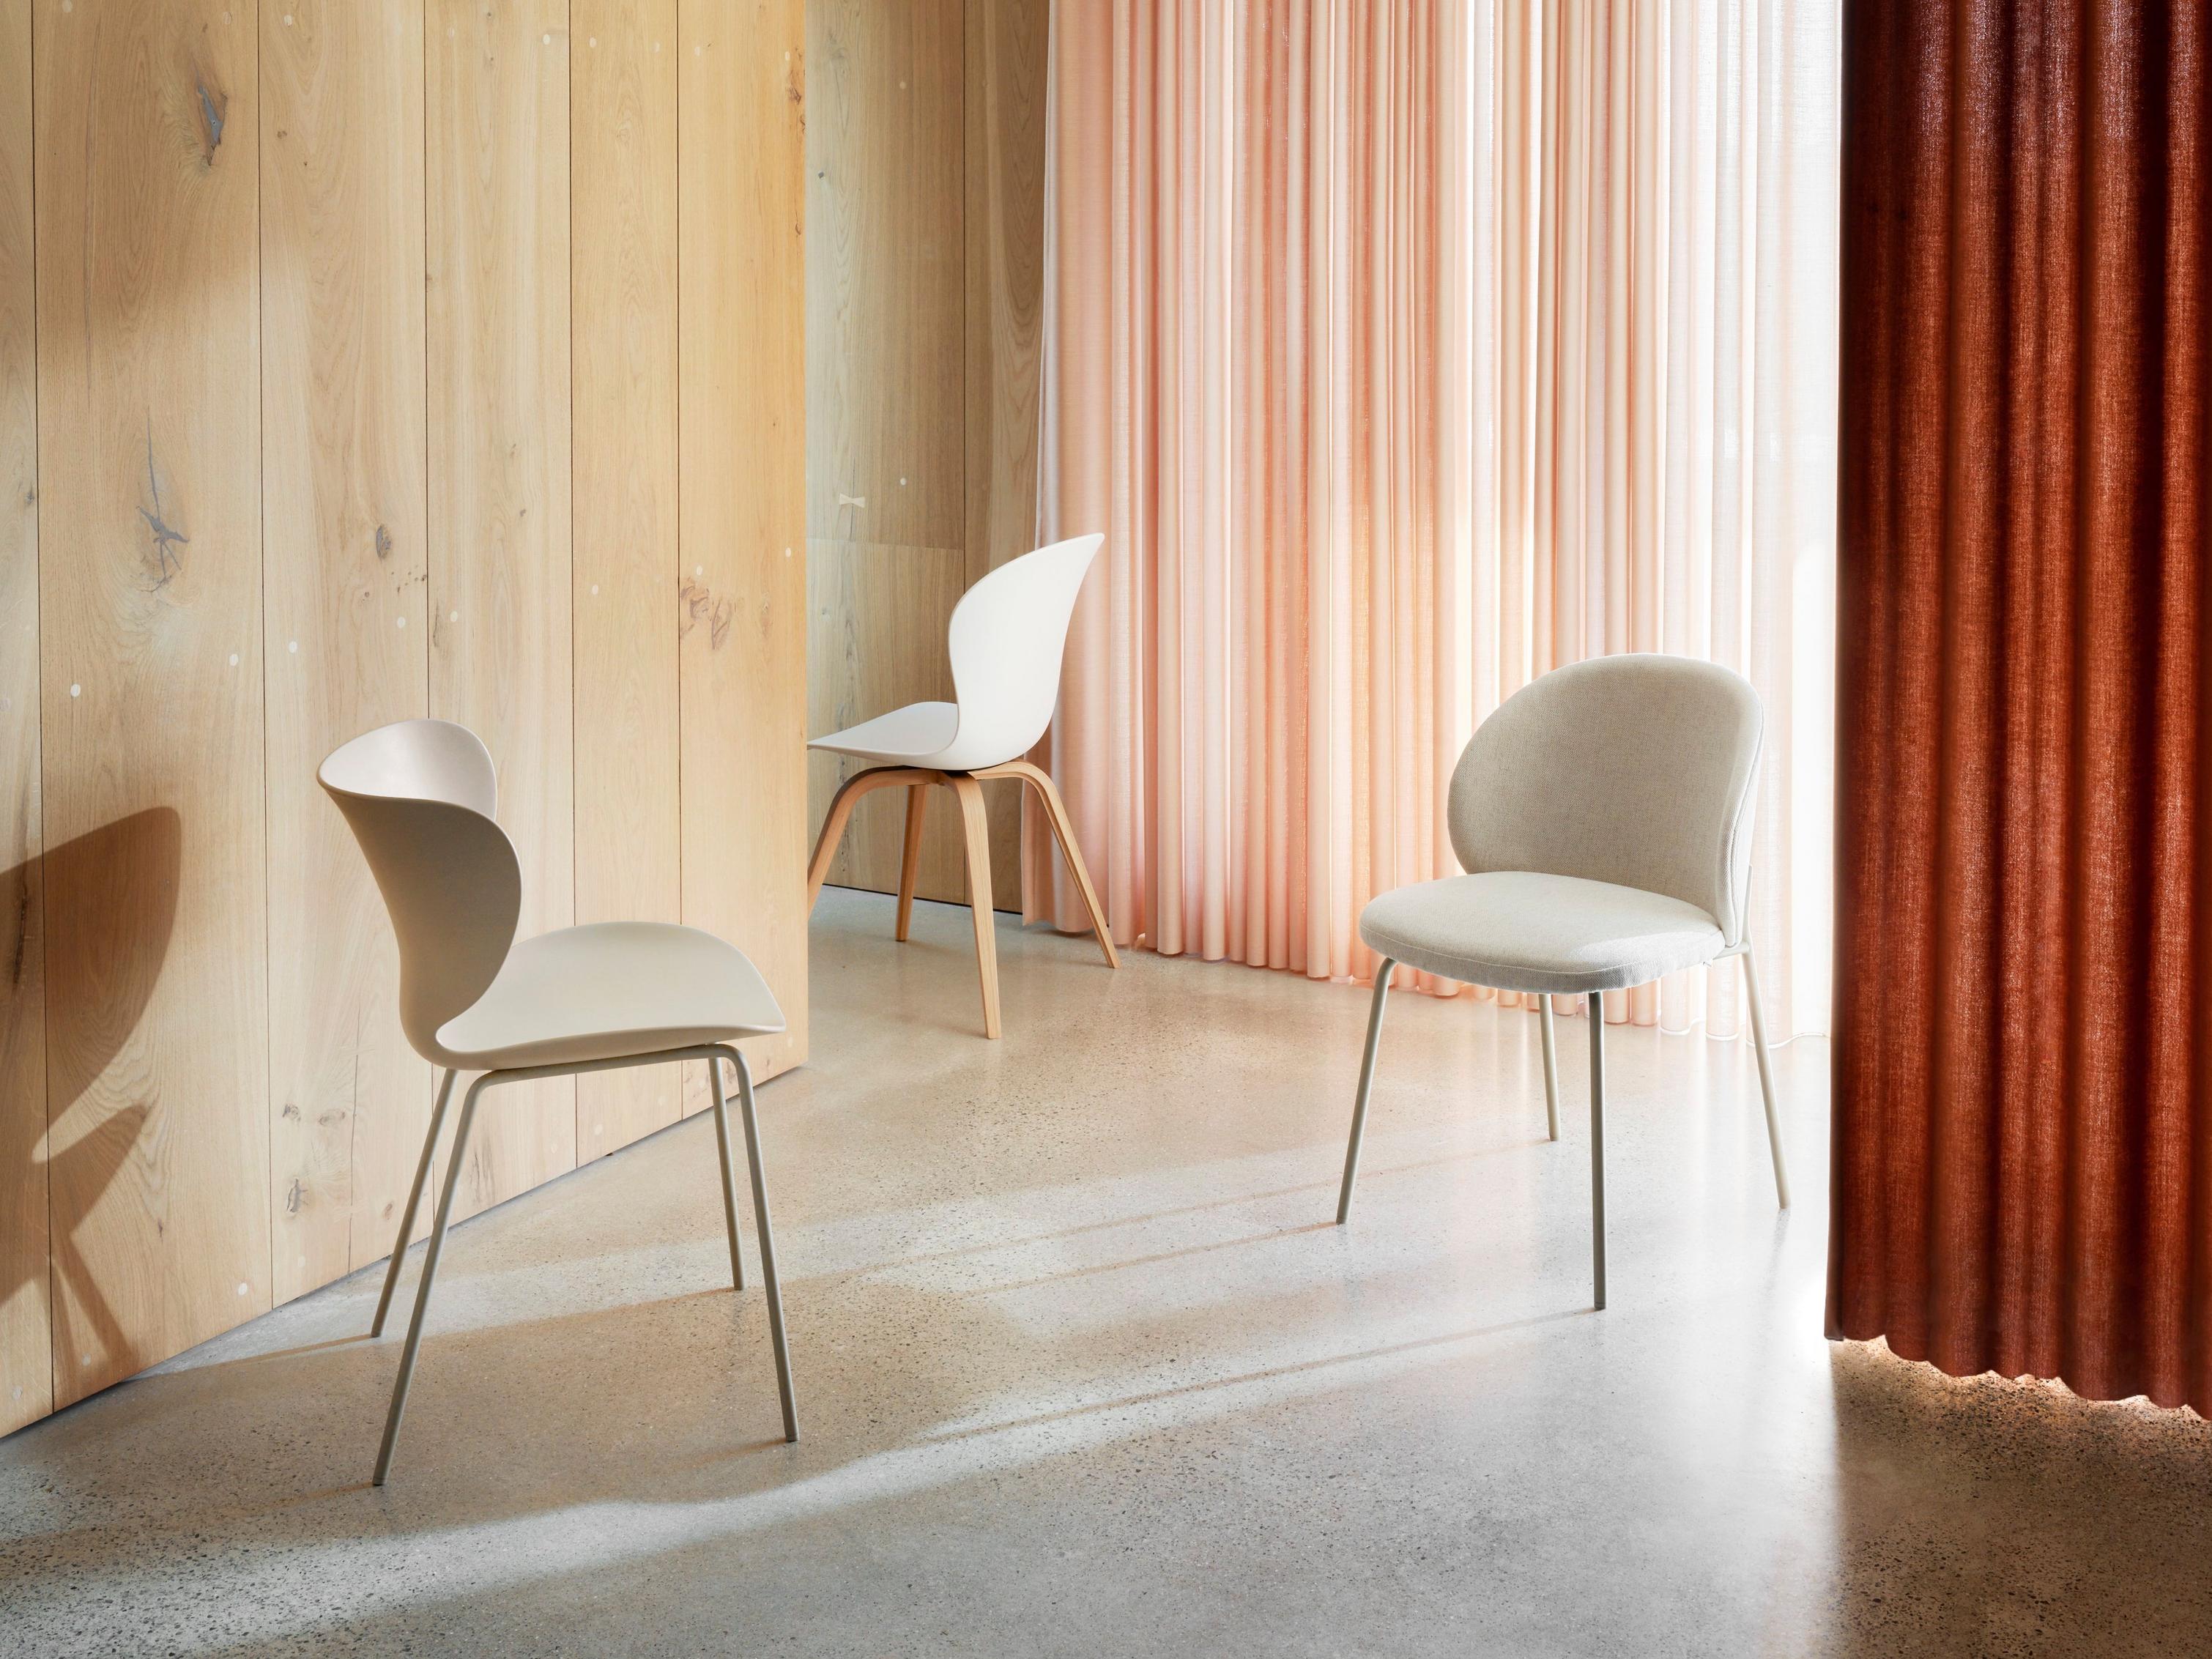 Modern chairs in a room with wooden wall and draped coral curtains